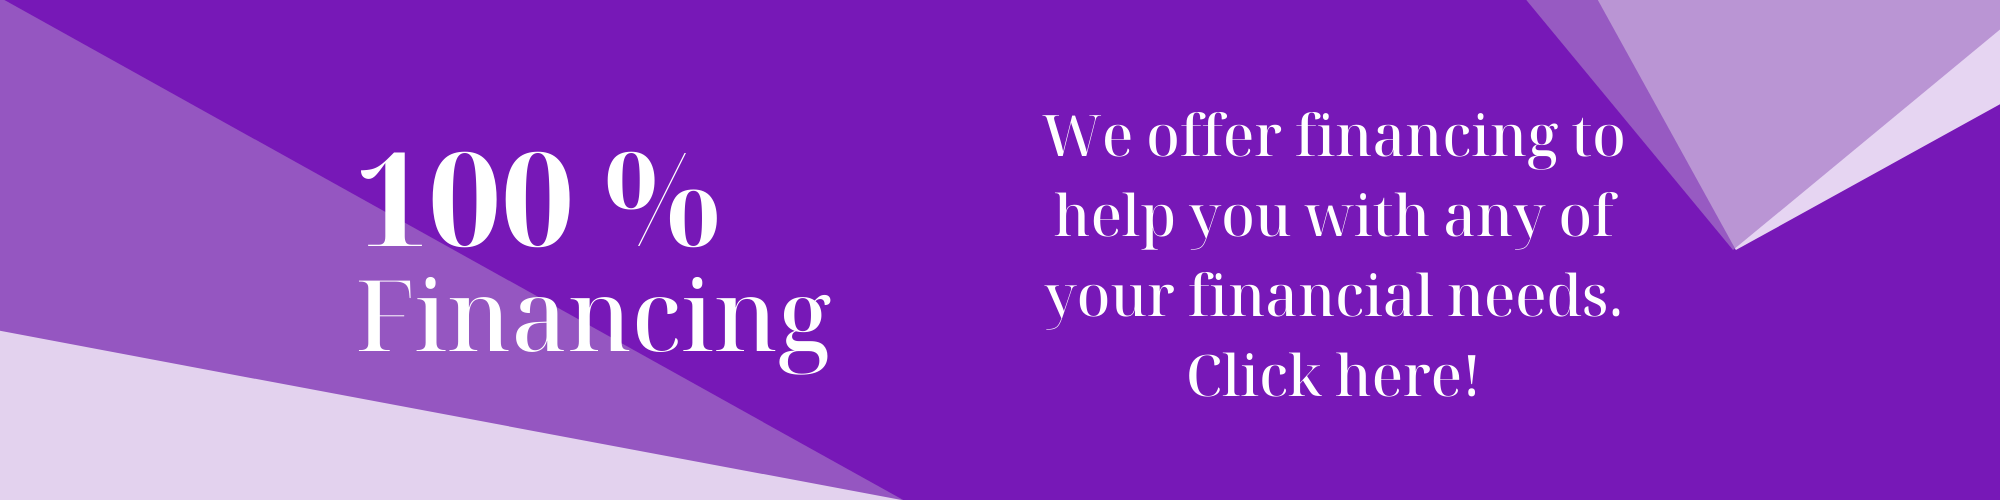 100% Financing. We offer financing to help you with any of your financial needs. Click here!